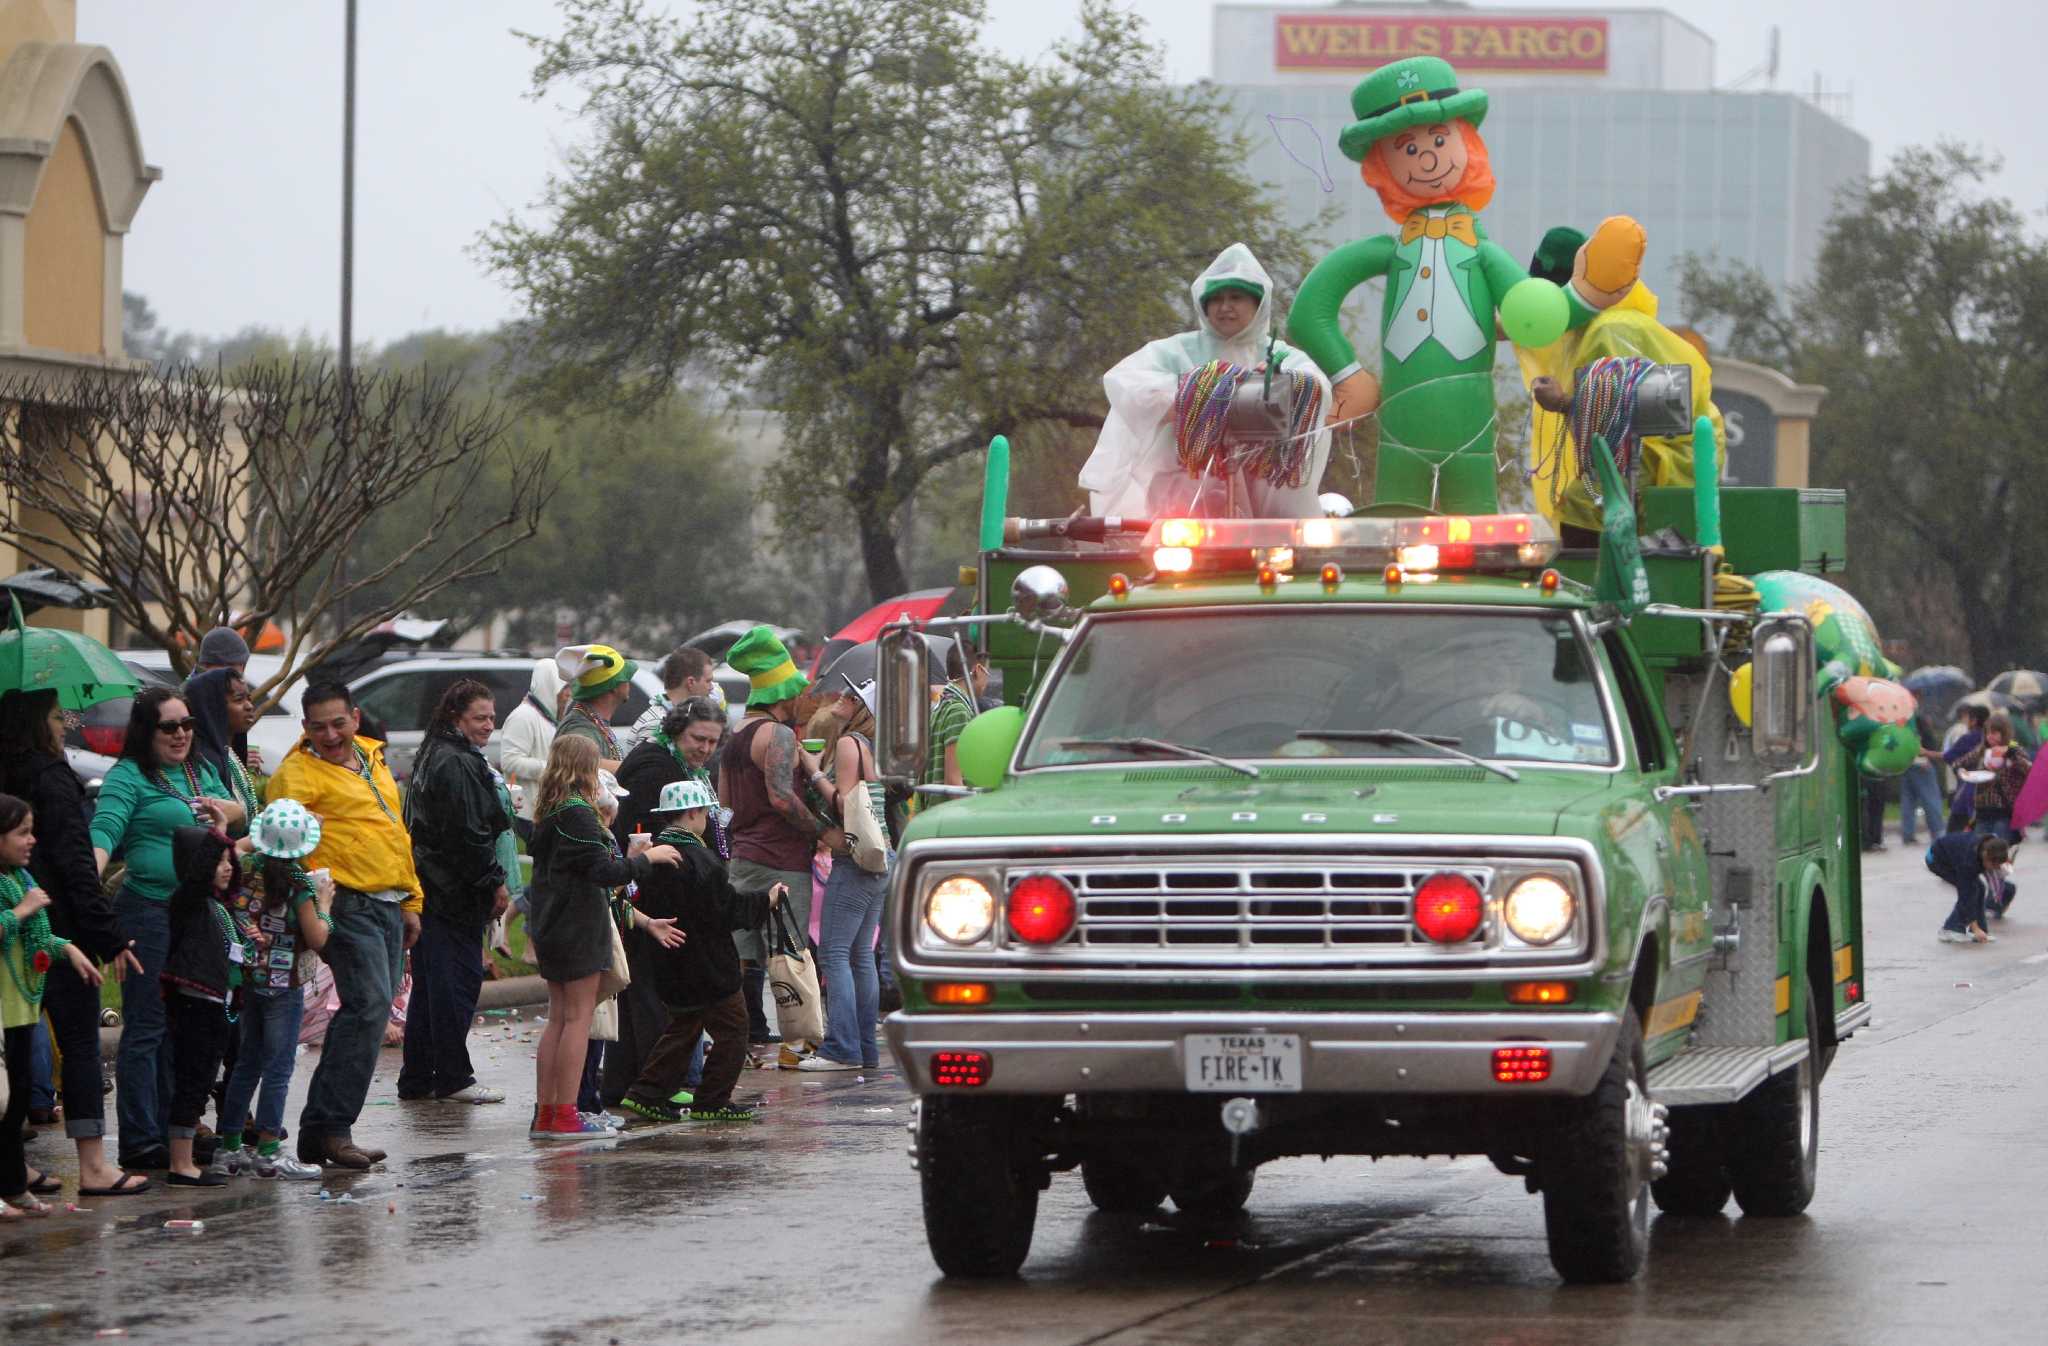 Annual FM 1960 St. Patrick's Day Parade brings out party spirit - Houston Chronicle2048 x 1346